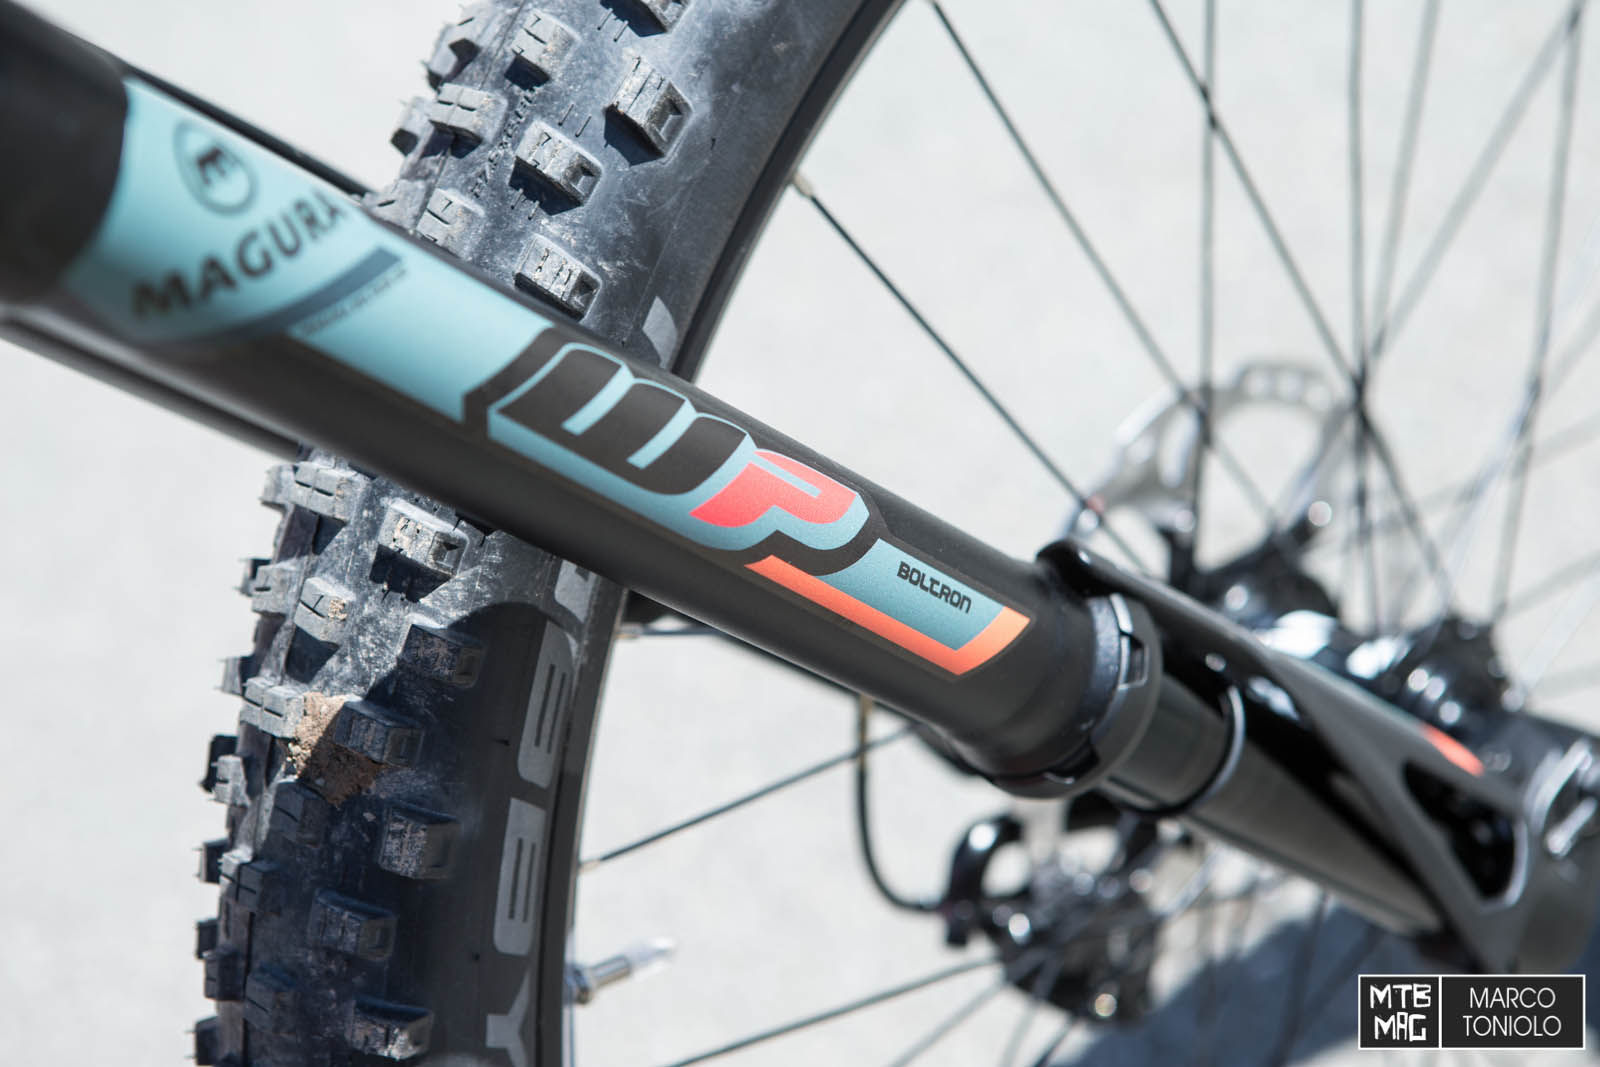 Magura and WP introduce the Boltron upside down fork